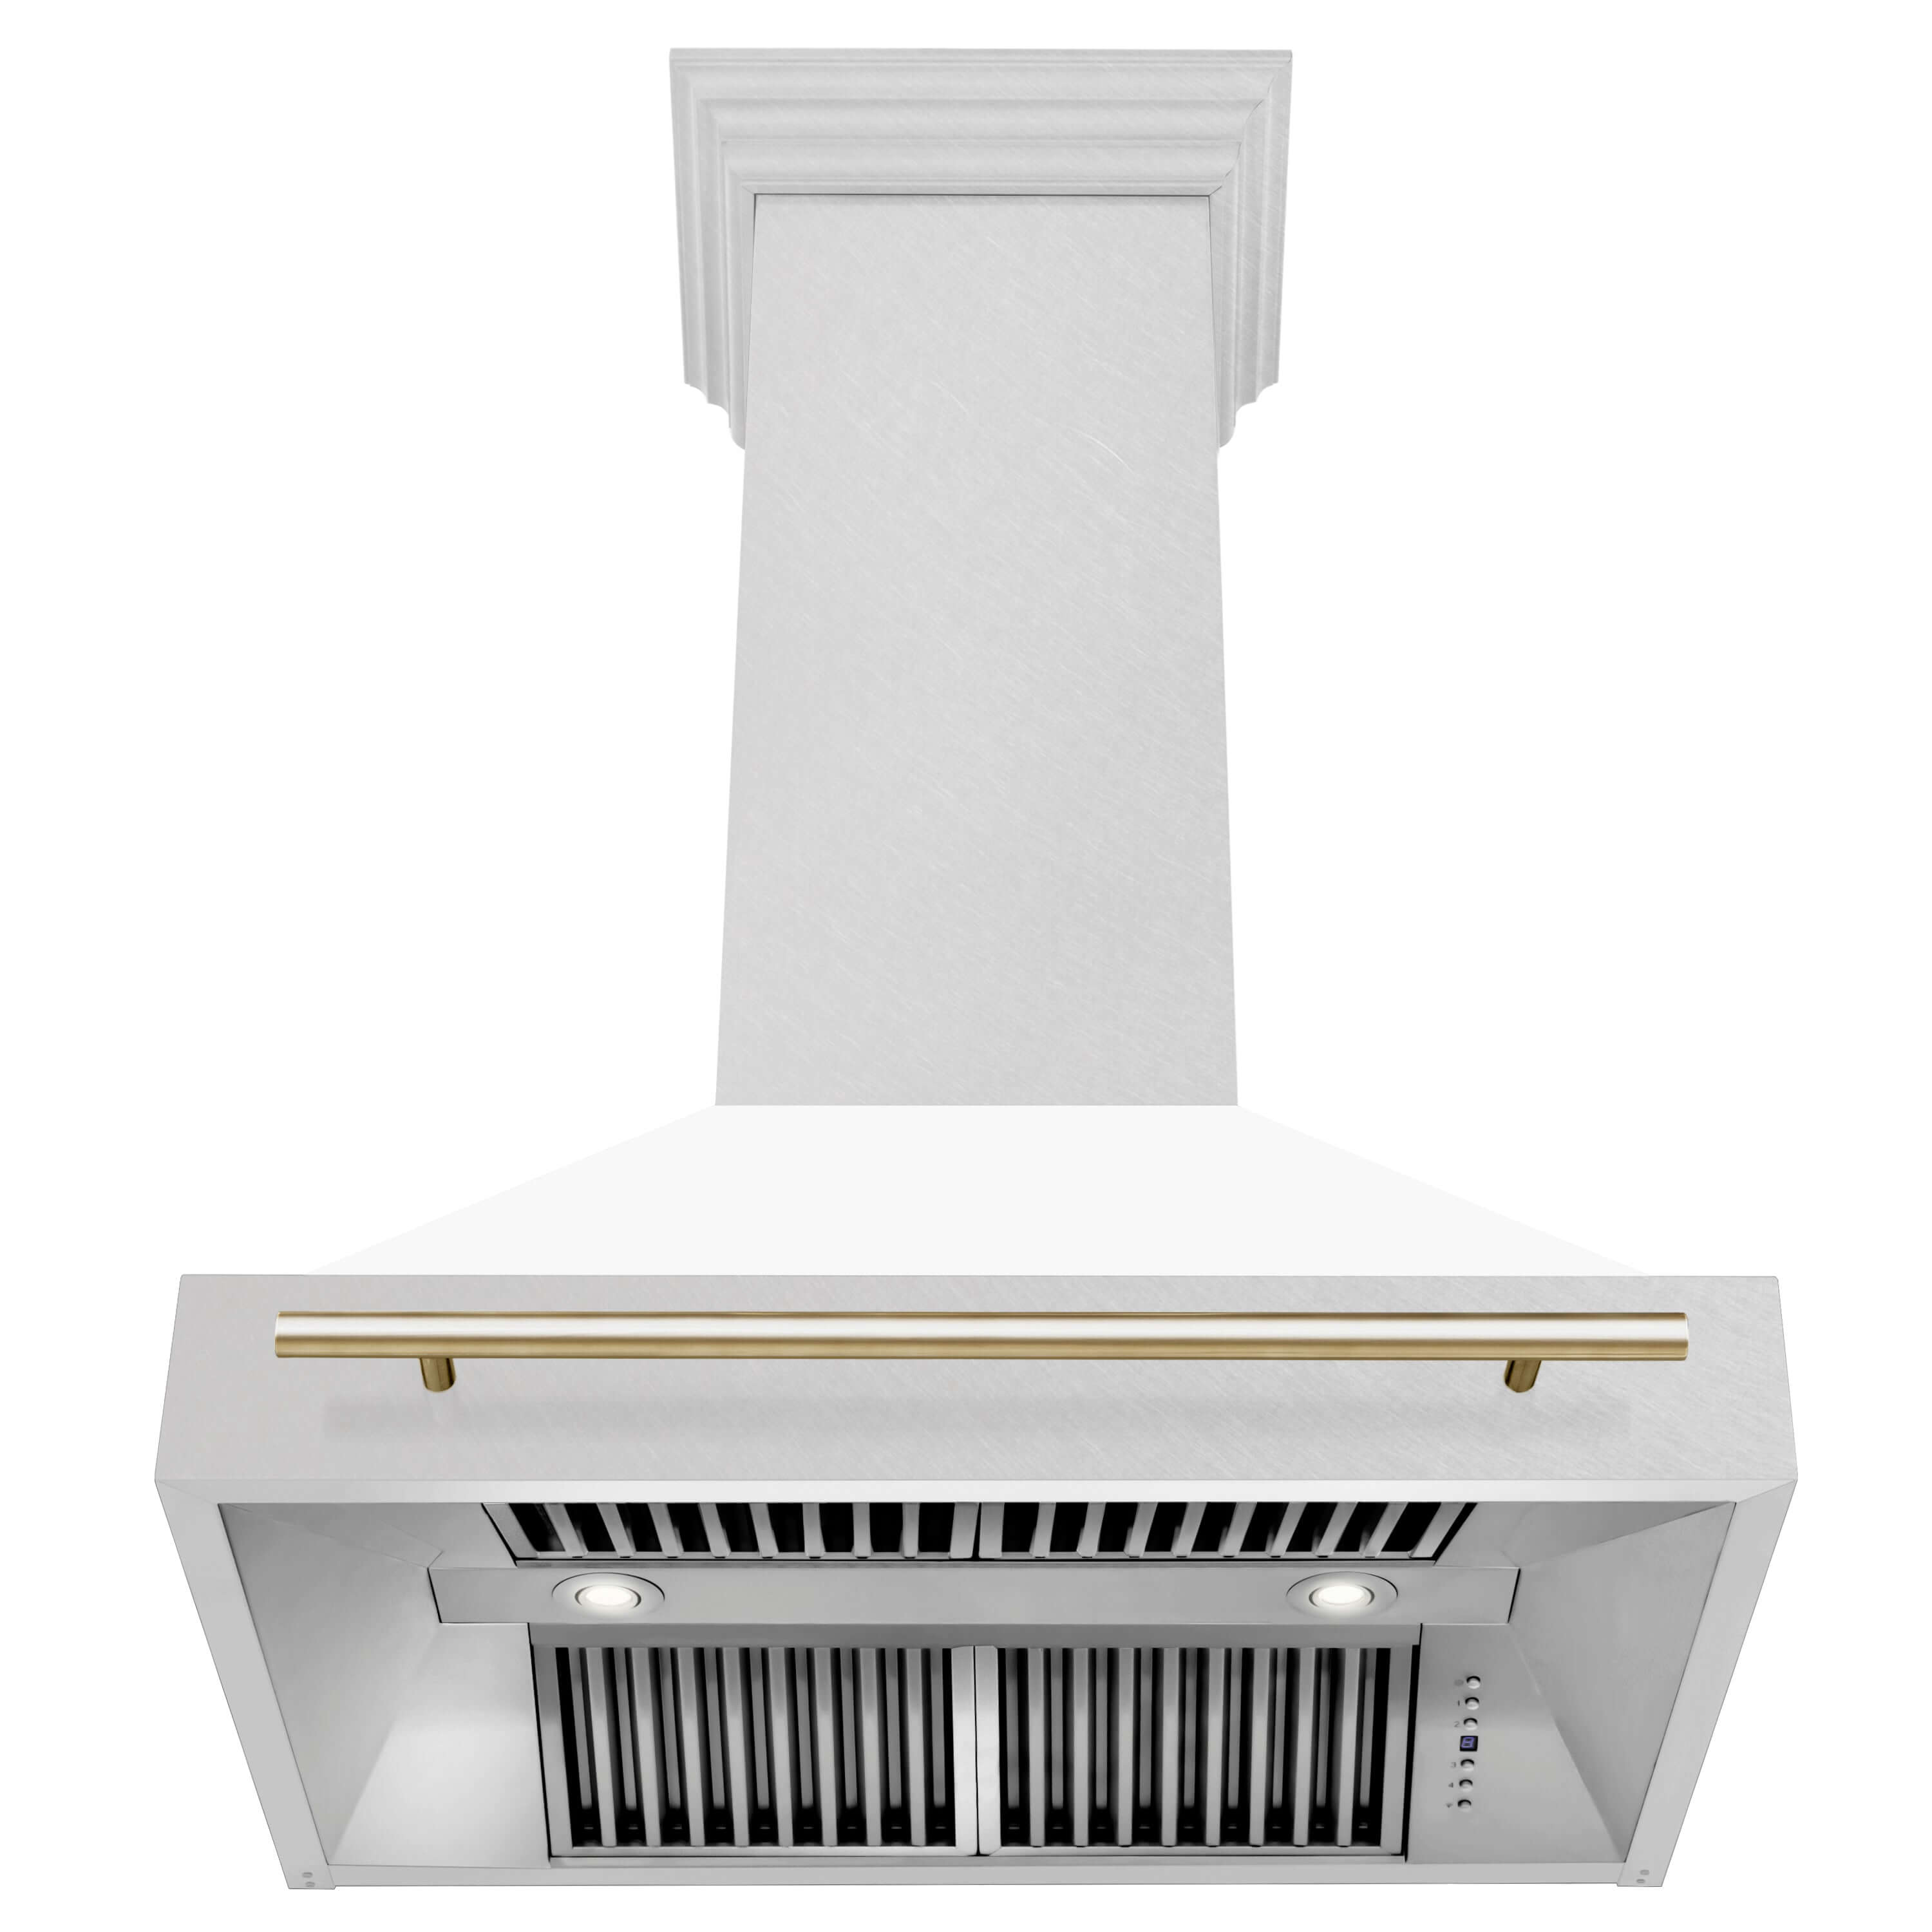 36 in. ZLINE Autograph Edition Fingerprint Resistant DuraSnow Stainless Steel Wall Mount Range Hood with White Matte Shell and Gold Handle Under View